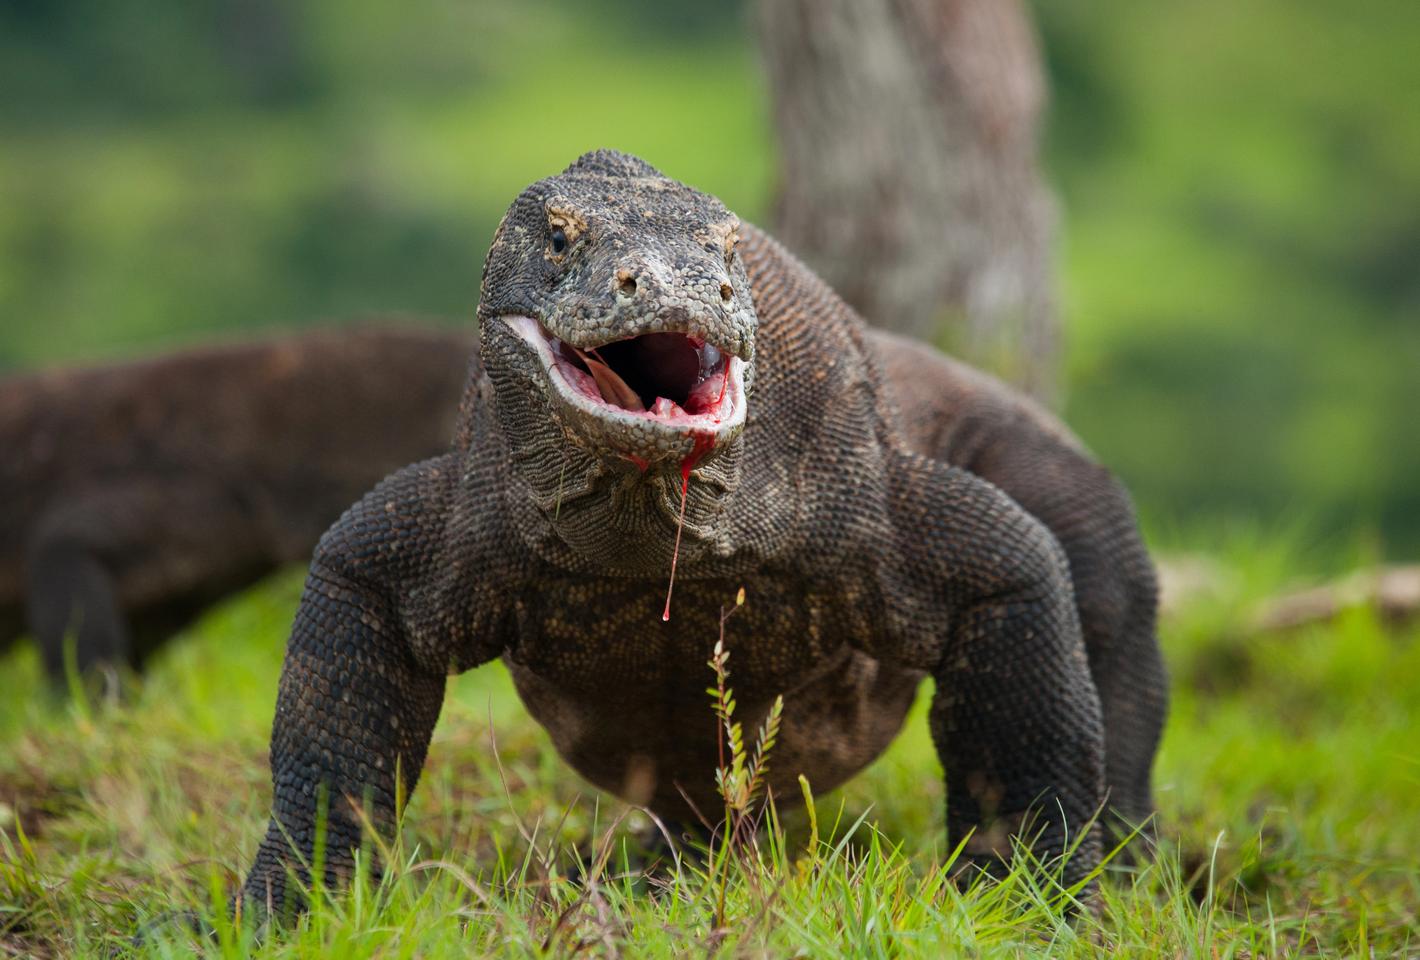 Metal mouth – Komodo dragons’ teeth found to have a sharp iron coating